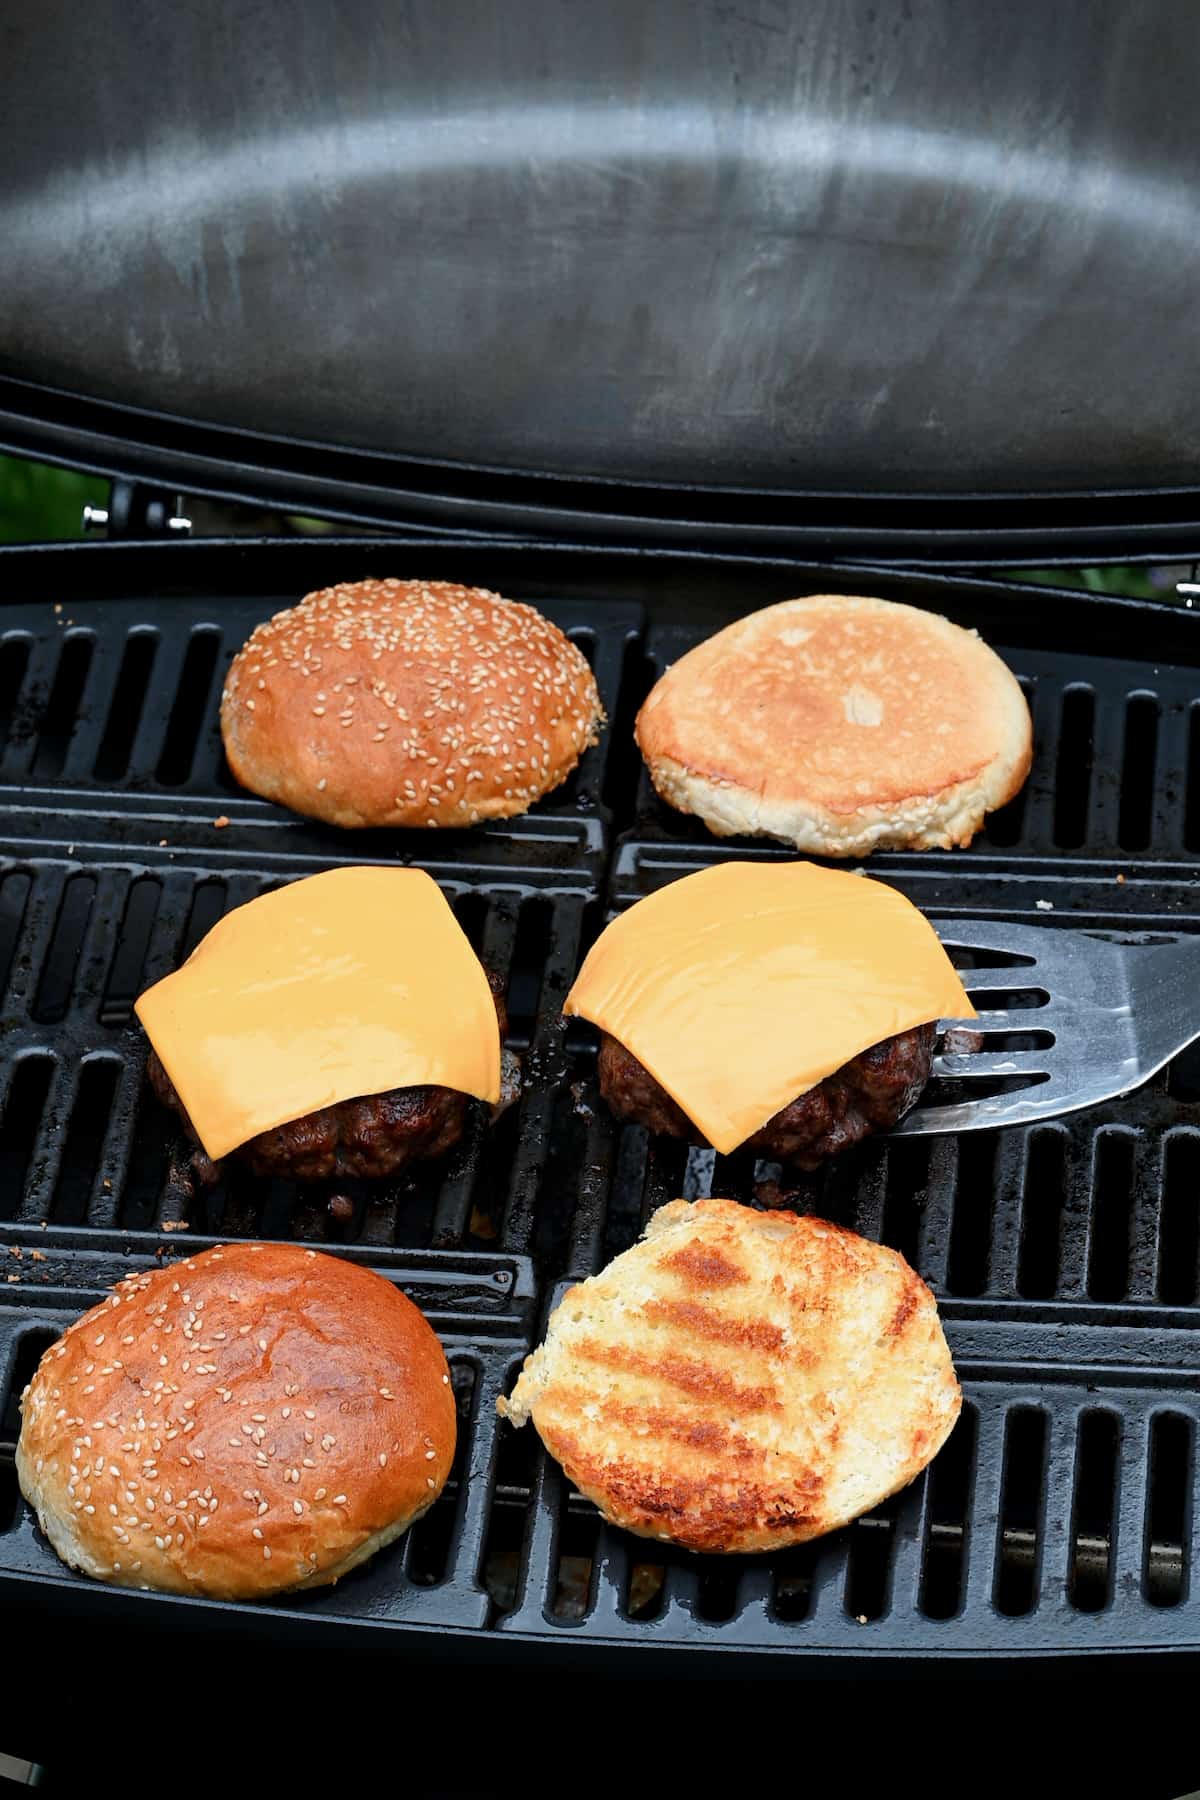 Melt cheese on the grilled patties.